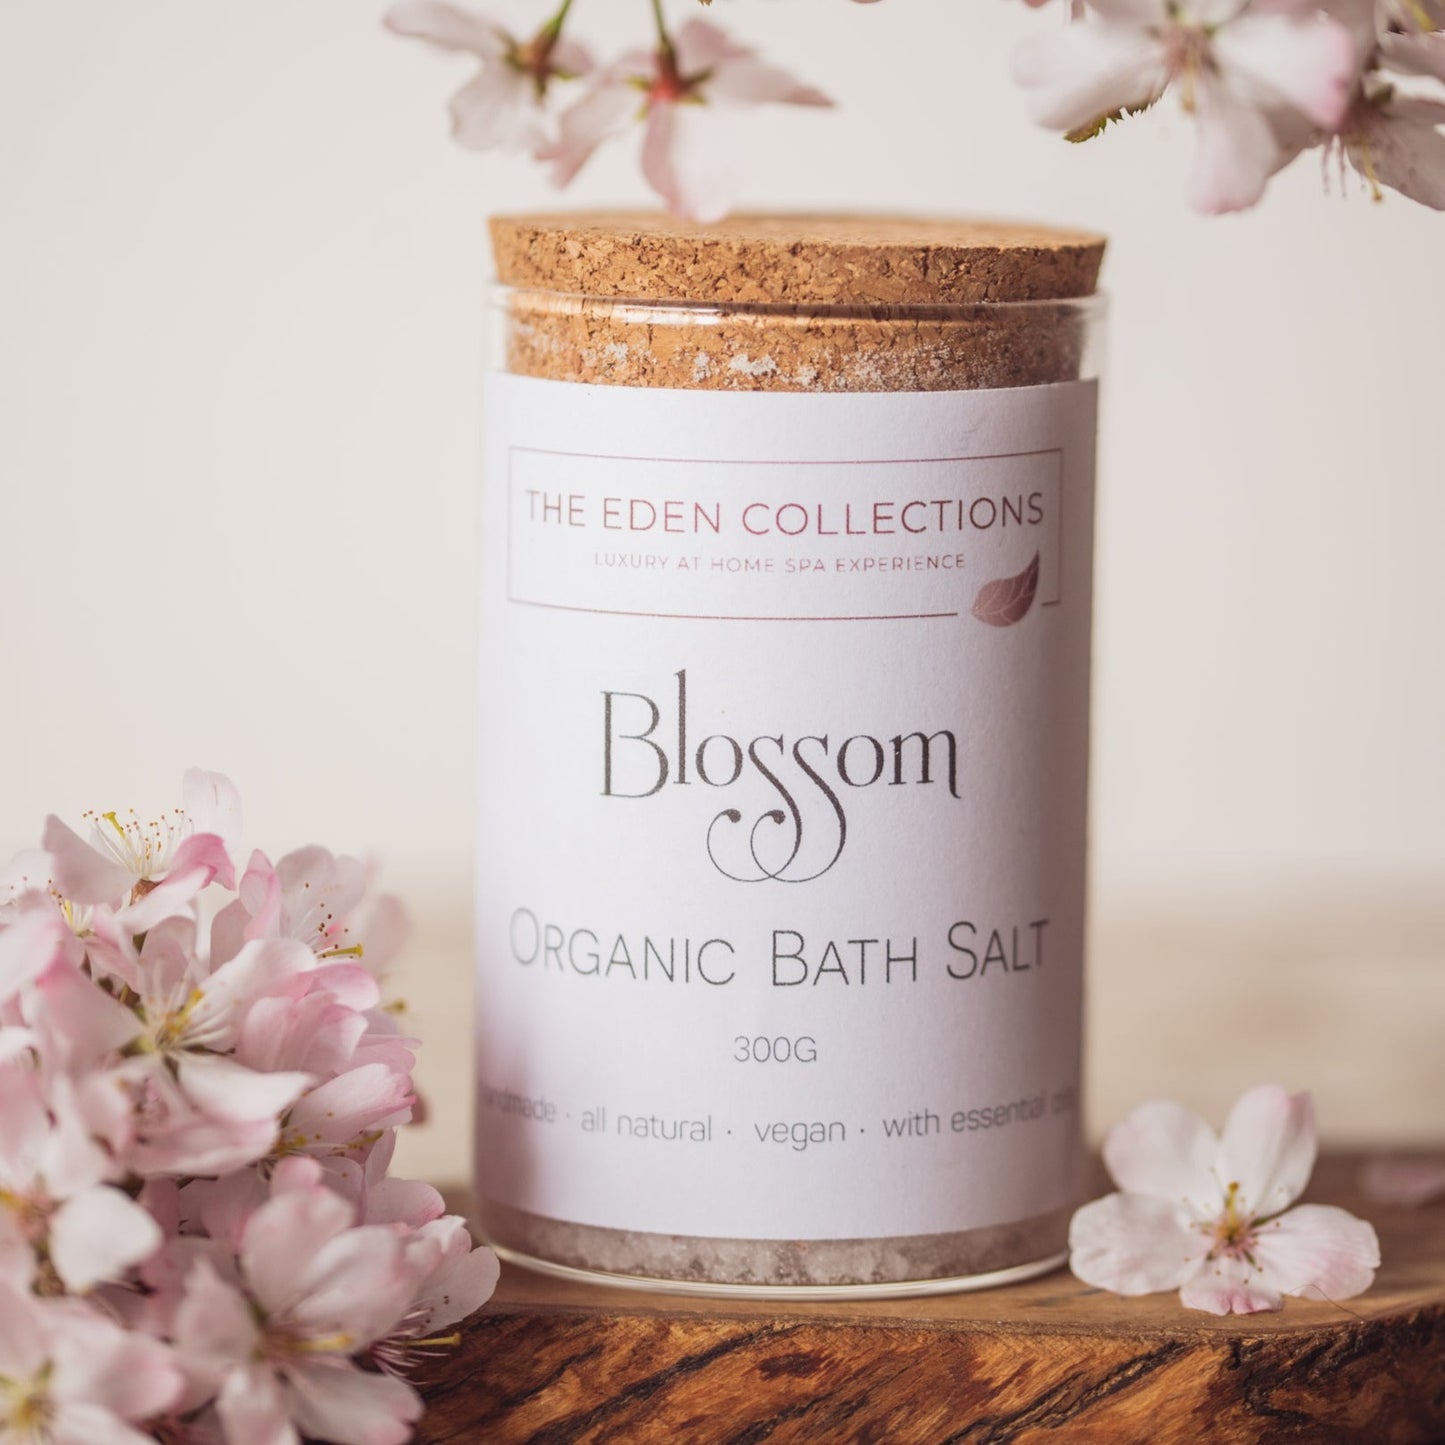 Organic Bath Salt in a glass tube with cork lid. Photographed with blossoms, made by The Eden Collections. 